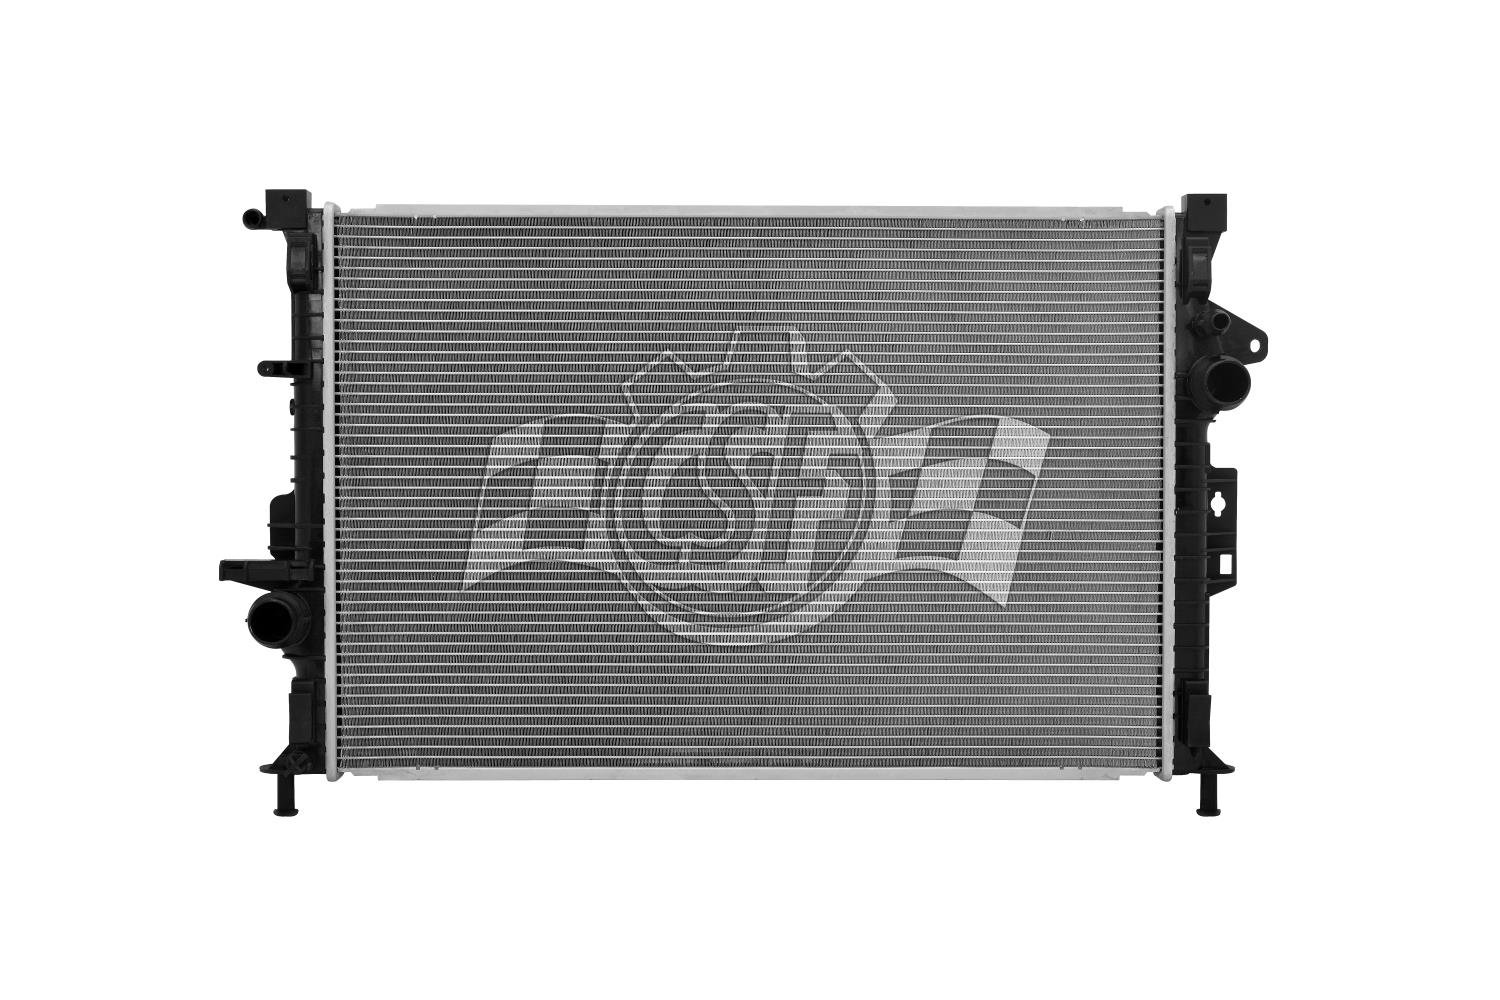 OE-Style 1-Row Radiator, Ford Transit Connect, Ford Escape